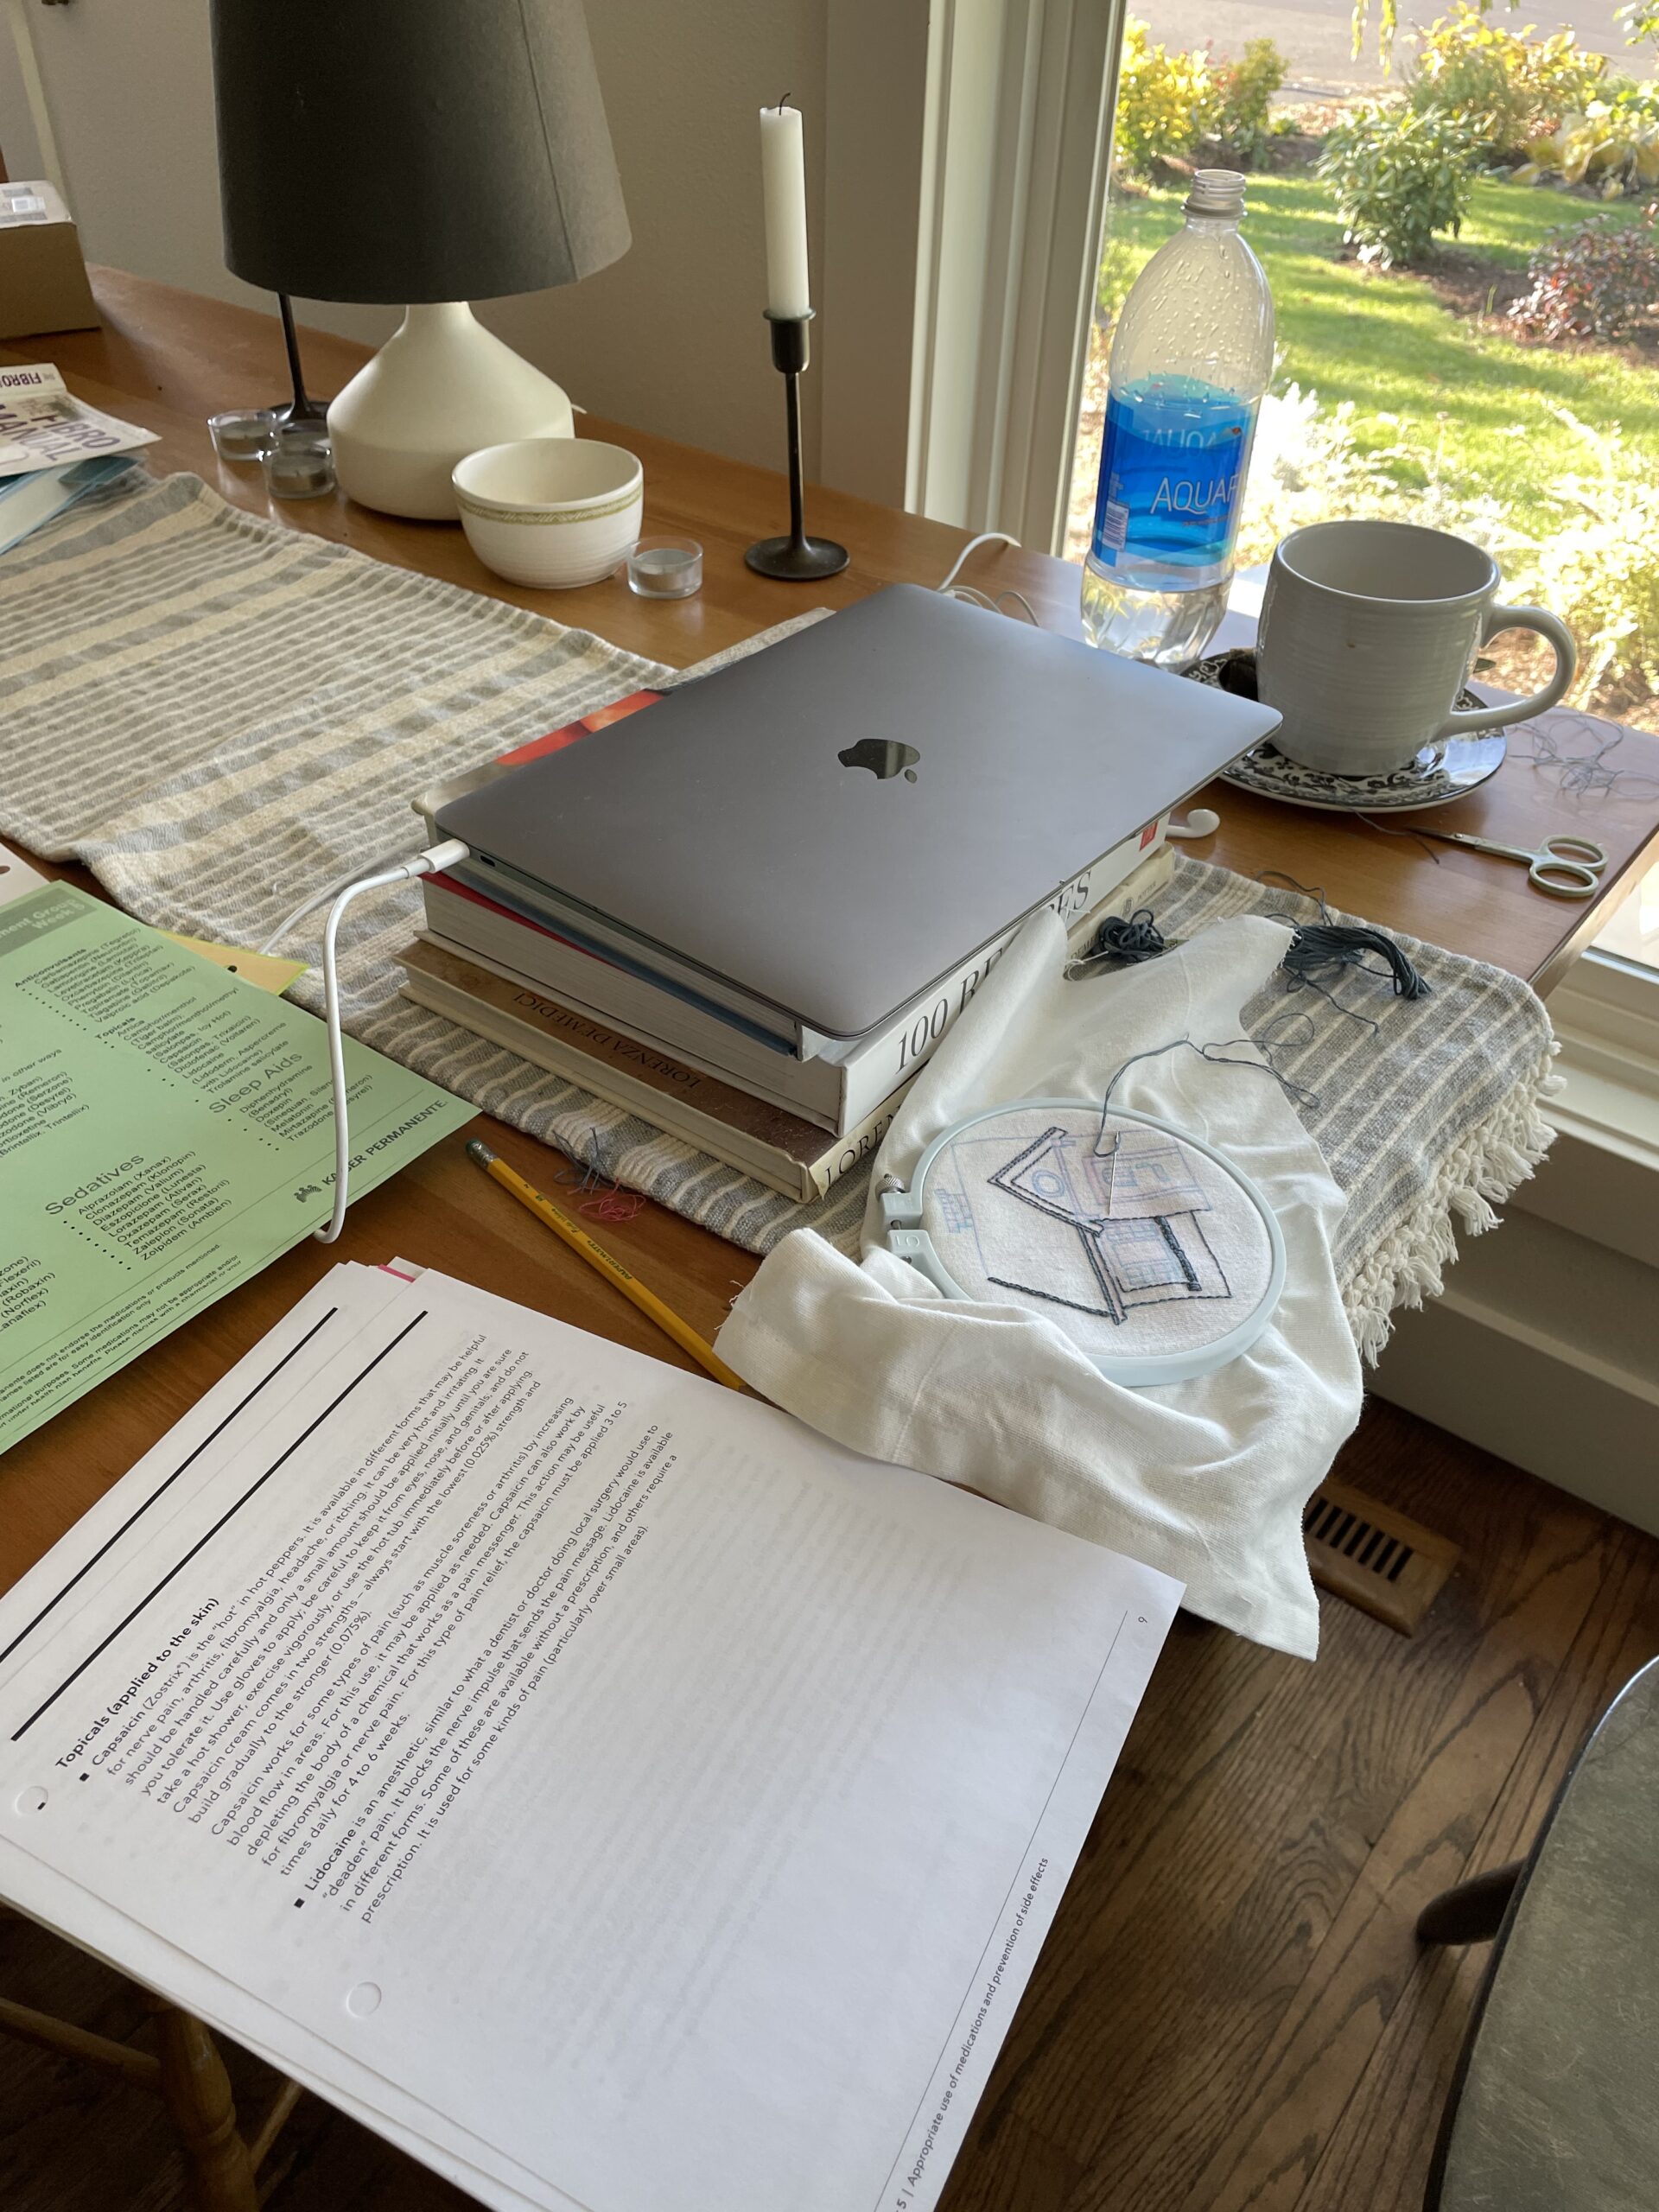 Tabletop with laptop, coffee mug, papers, and needlework.